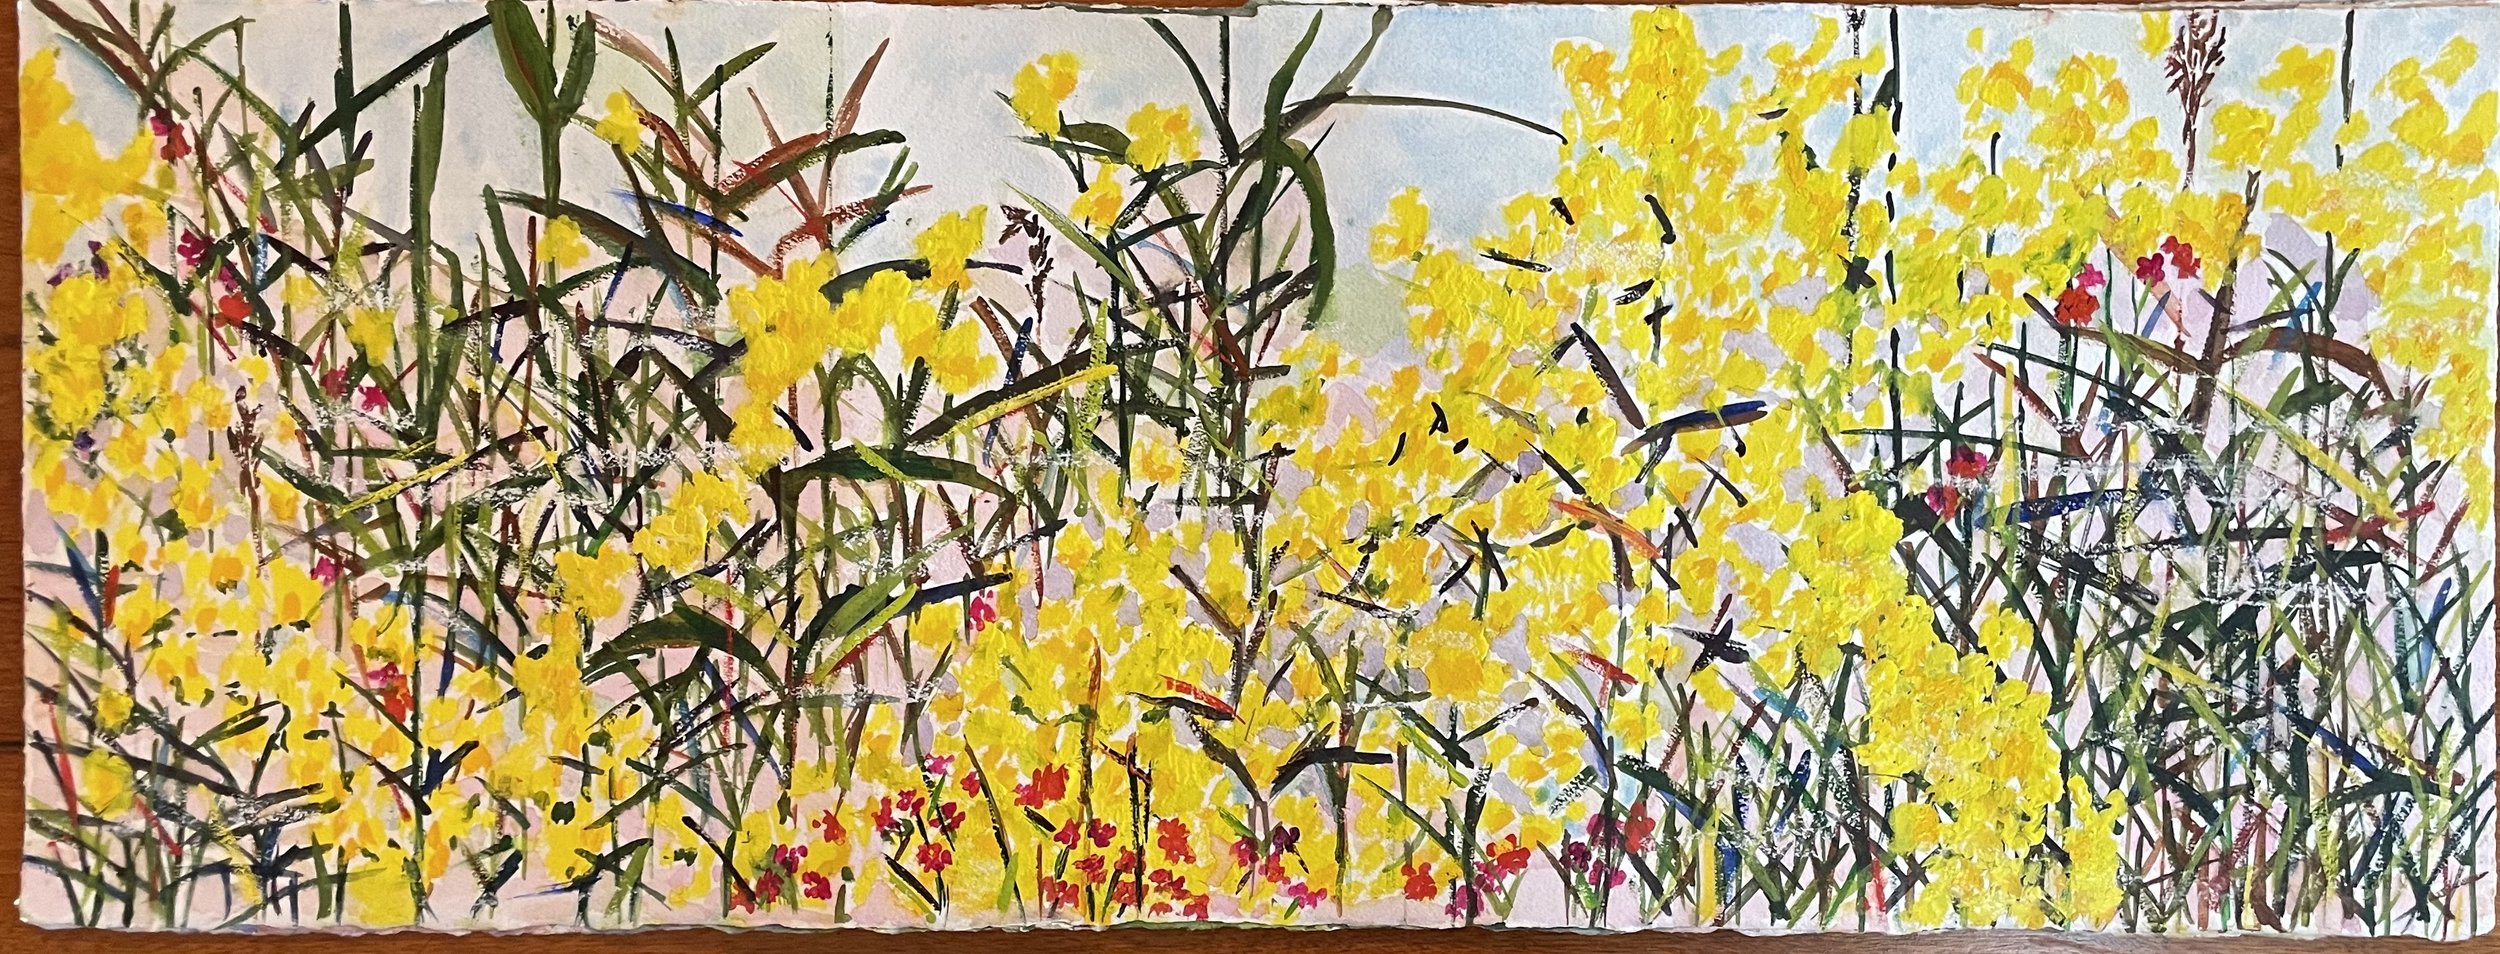 Catherine's Meadow 2023, 30x15 in